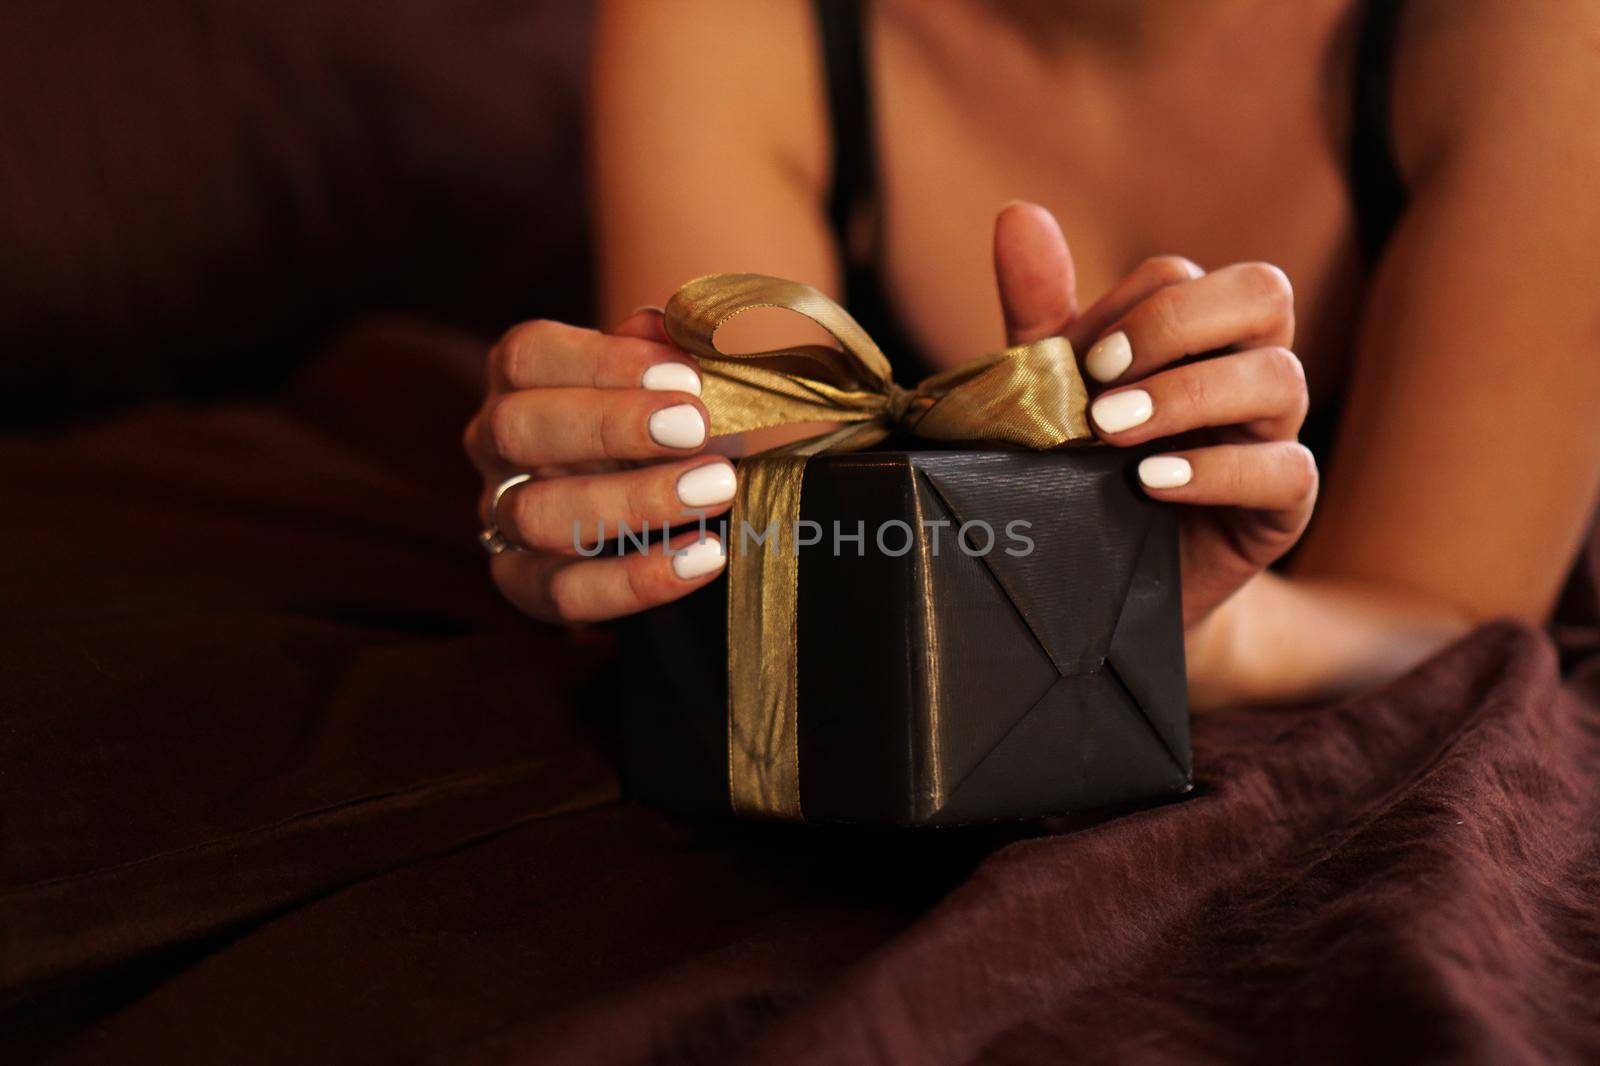 The woman opens a gift in a black box with a gold ribbon. Closeup photo